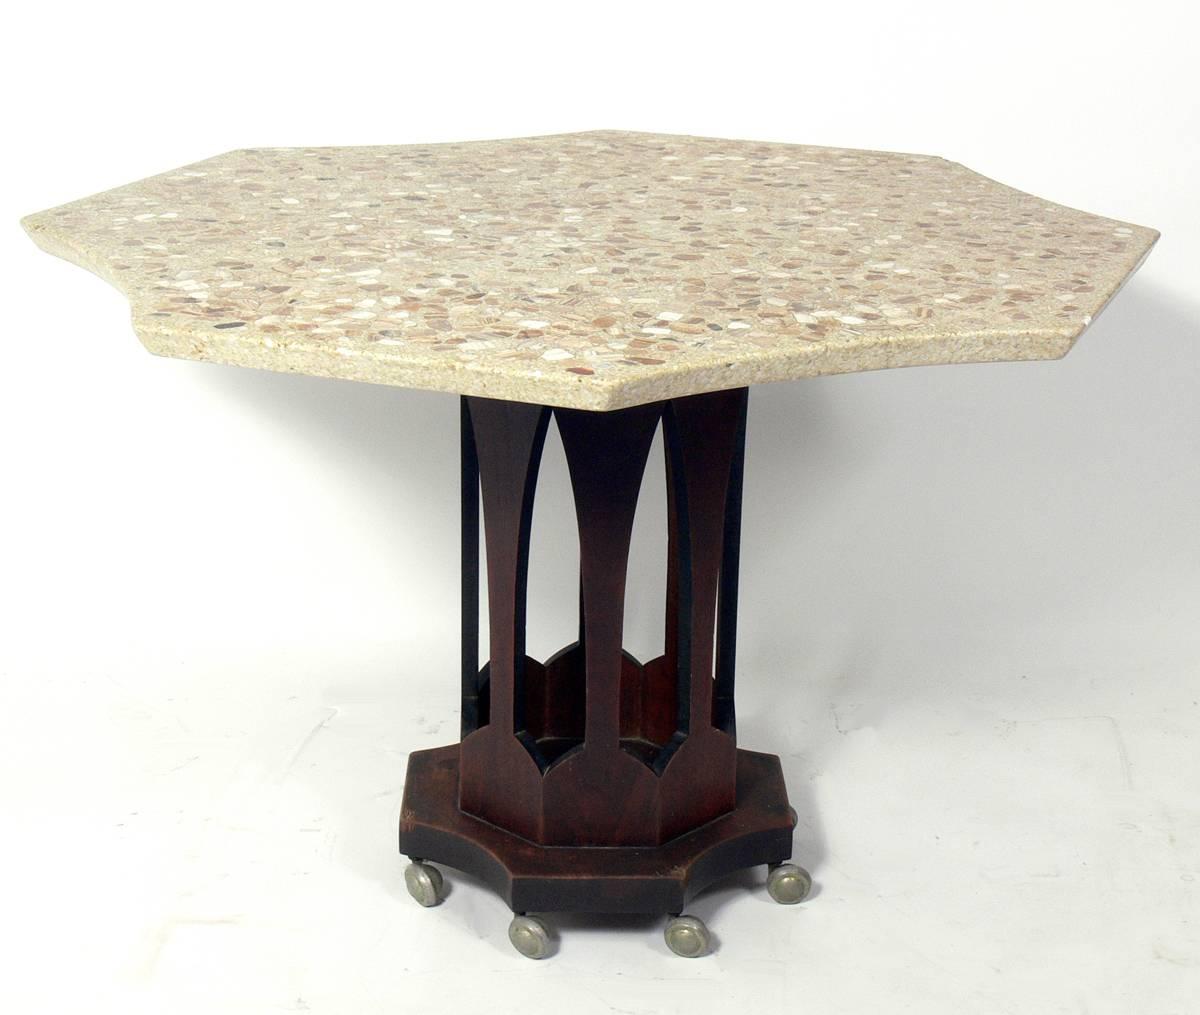 Harvey Probber Terrazzo and Walnut Dining Table, American, circa 1960s. This table is a versatile size, and can be used as a dining table, game table, or dinette table. It would great with any of the Paul McCobb, Edward Wormley for Dunbar, or Jens